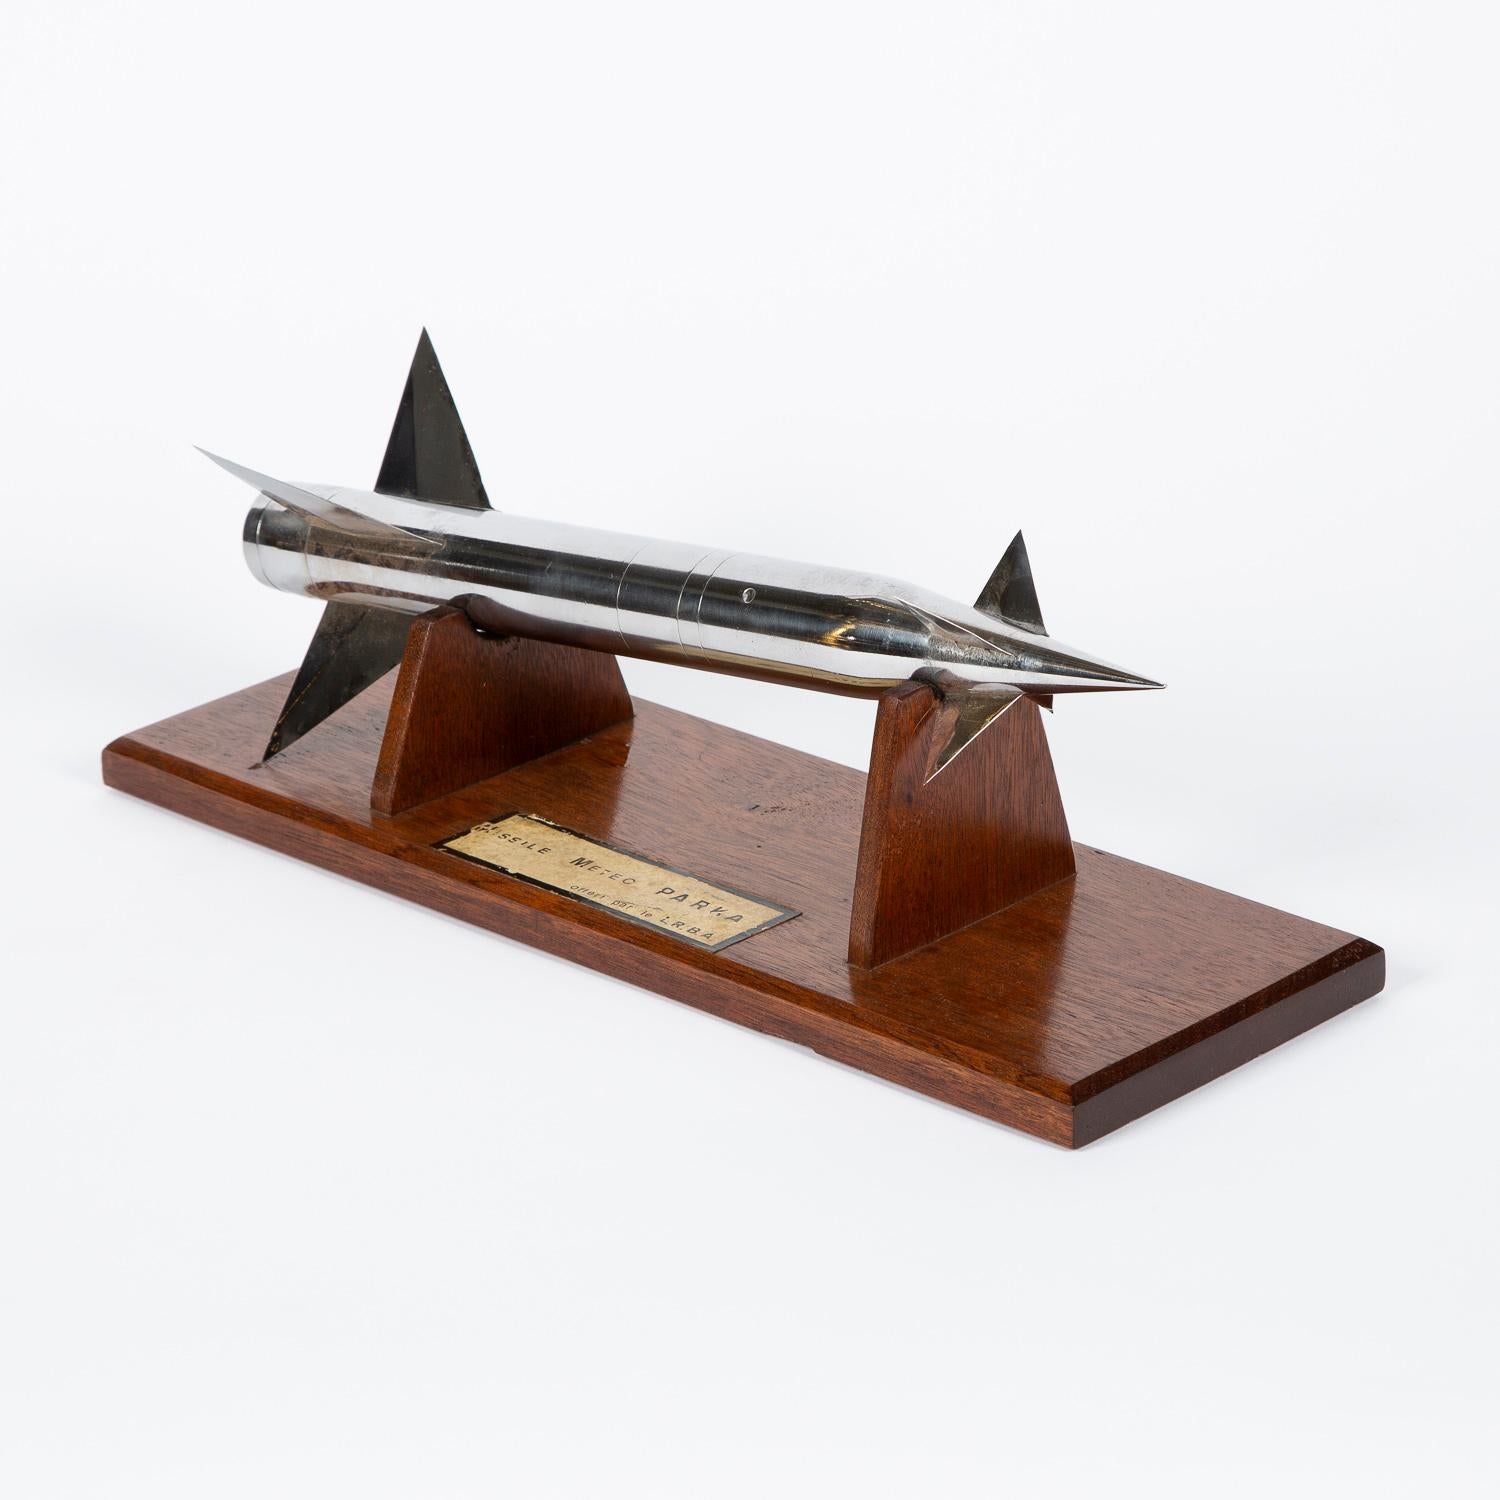 A wind tunnel model of a French sounding (meteorological) rocket by Laboratoires Recherches Balistiques et Aérodynamiques (L.R.B.A). Circa 1950.

Length of model 40 cm.

Weight of model: 1.9 kg.

Mounted on a wooden Stand, with paper label: MISSILE